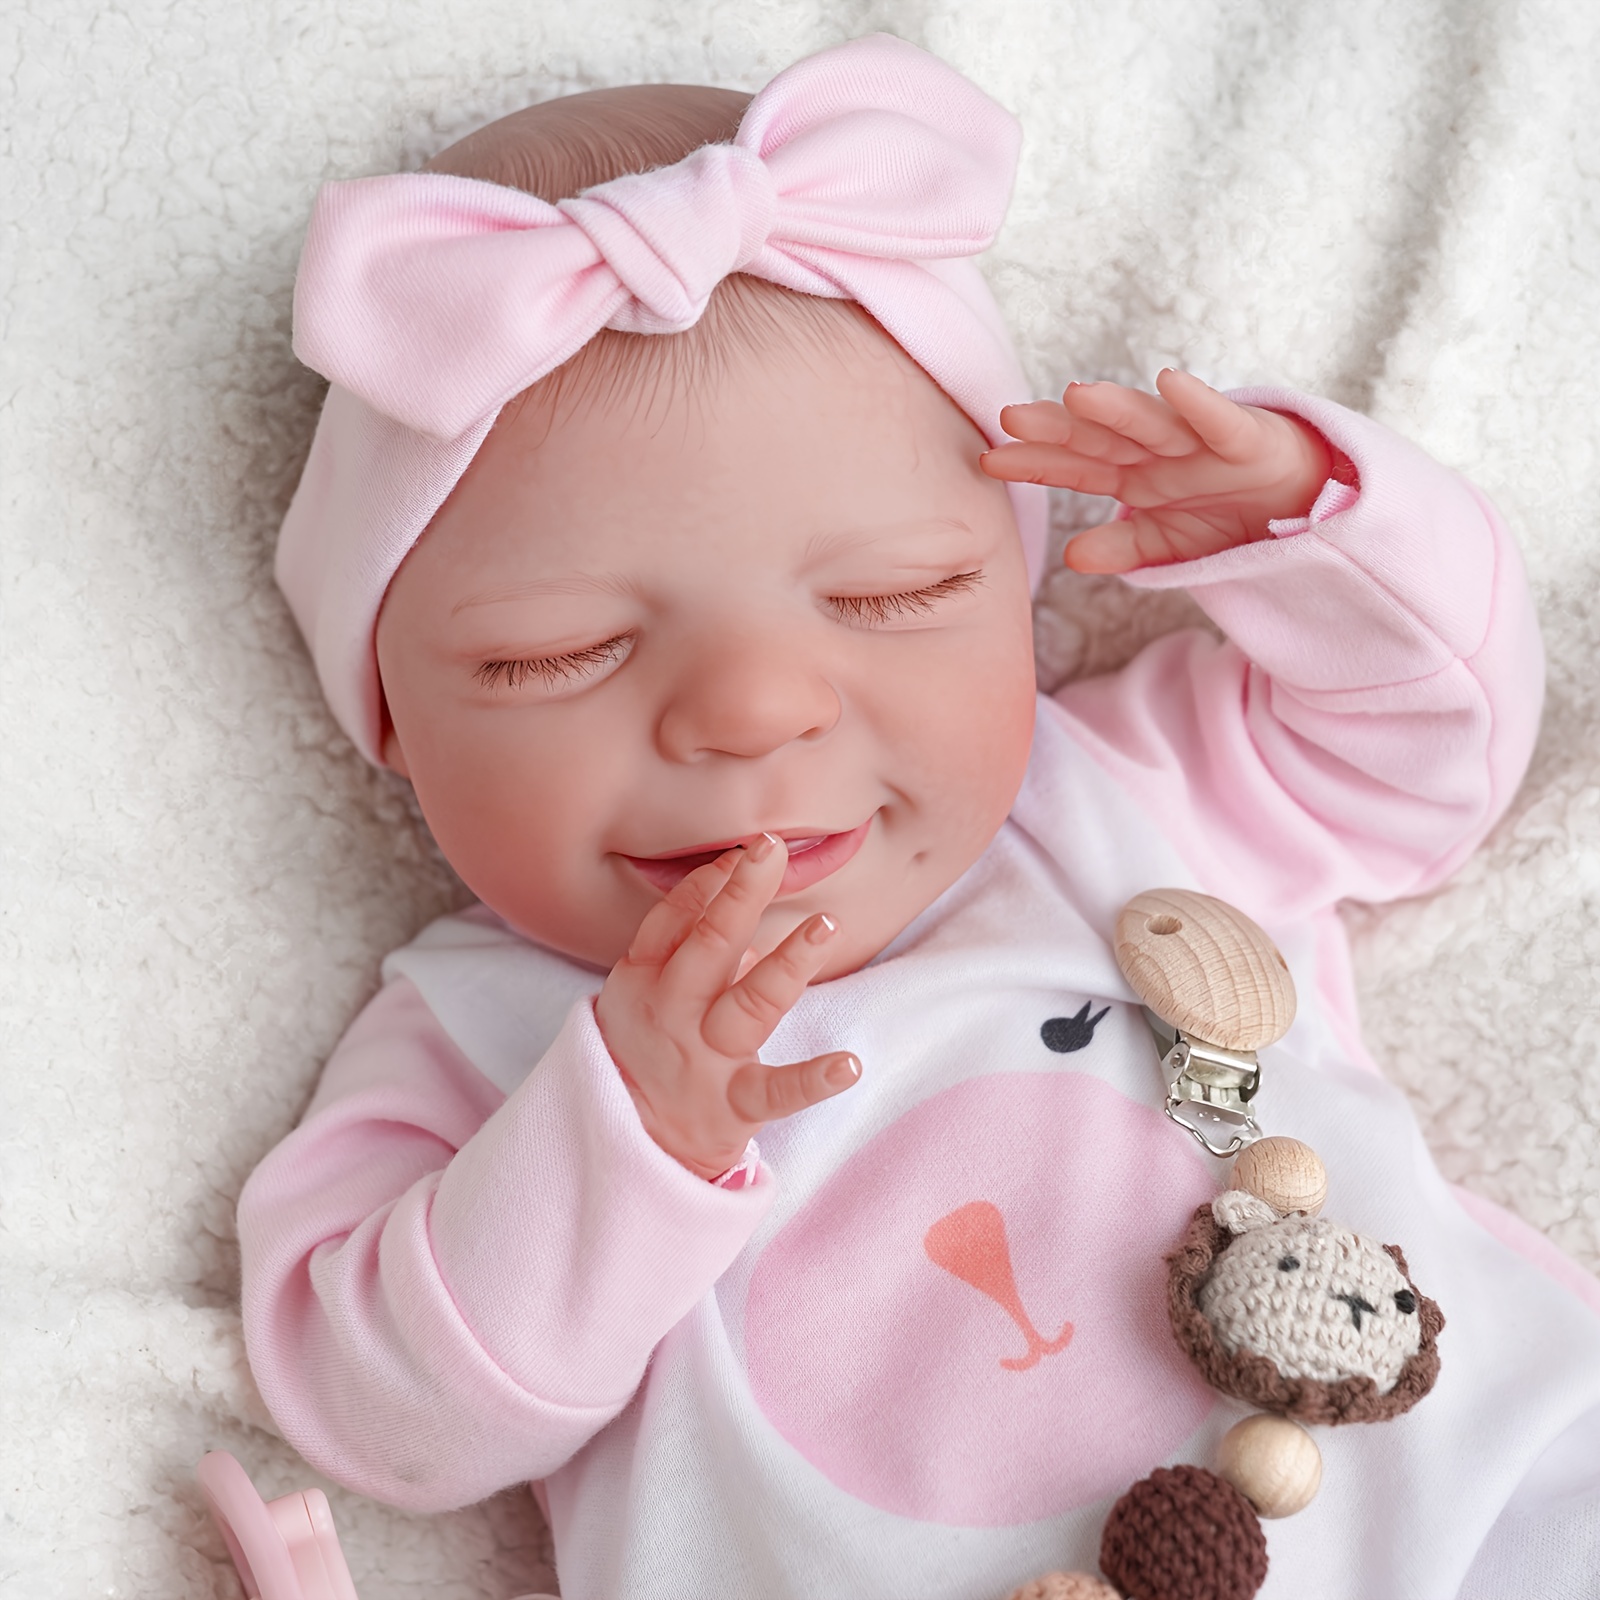 Sleeping Cuddle Therapy Realistic Reborn Baby Doll Cheap That Looks Real  Gift For Little Girl Lifelike Soft Vinyl Realistic Newborn Baby Doll 